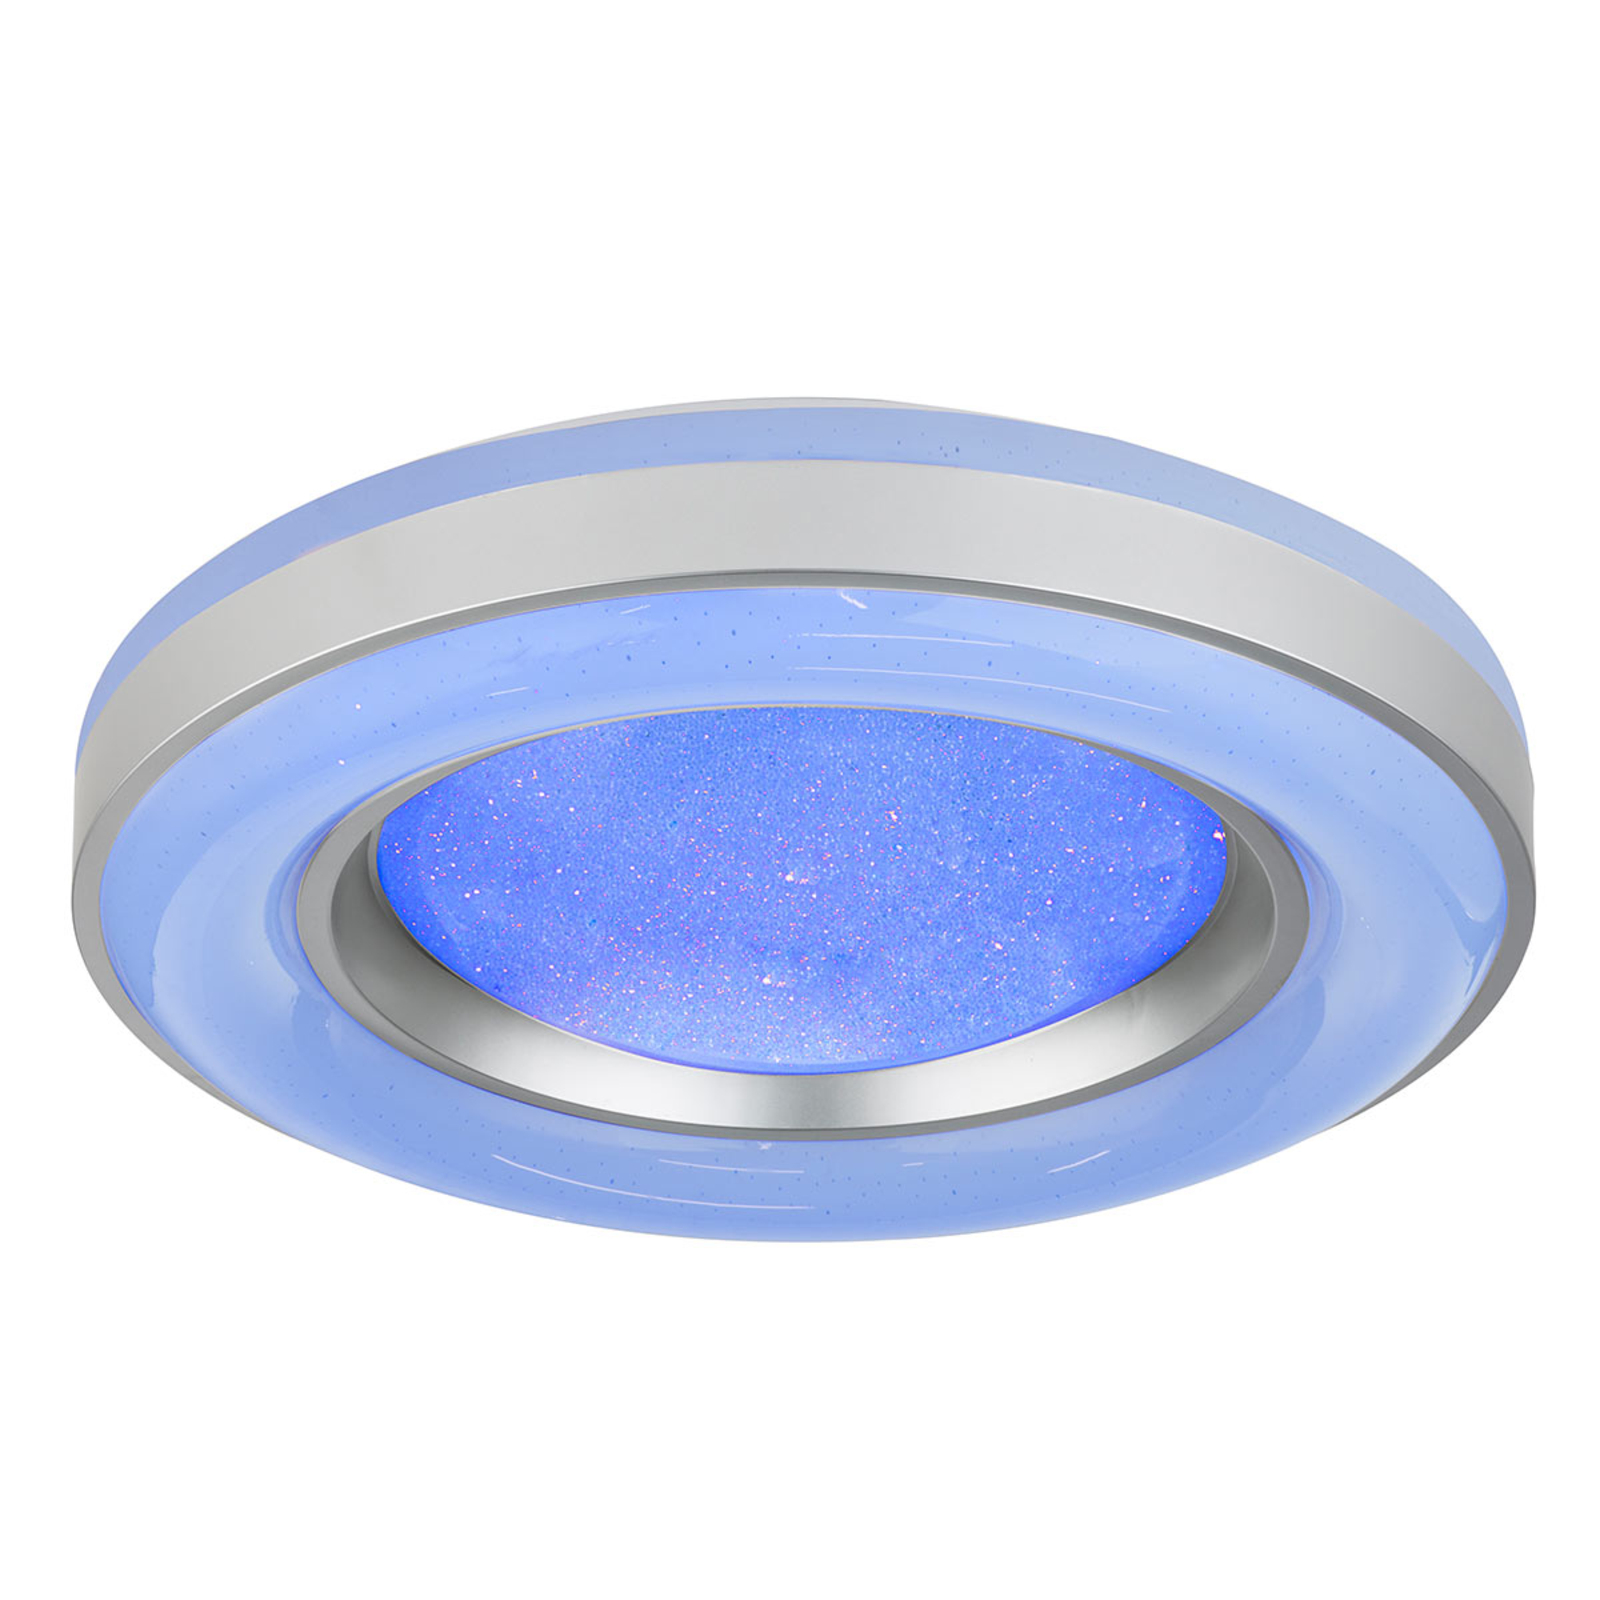 Colla LED ceiling lamp with remote control